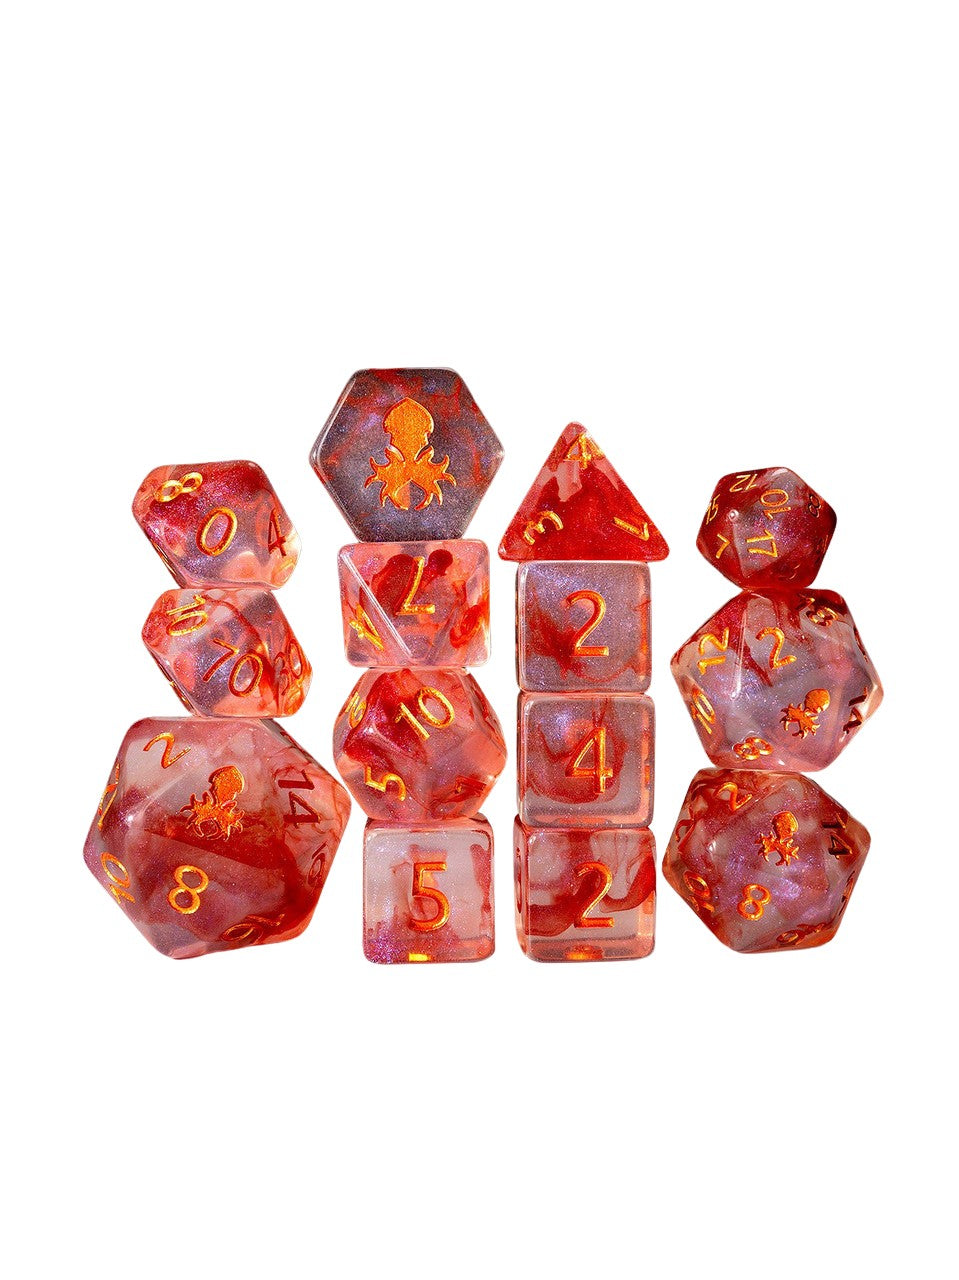 Blood Curse 14pc Polyhedral Dice set with Copper Ink